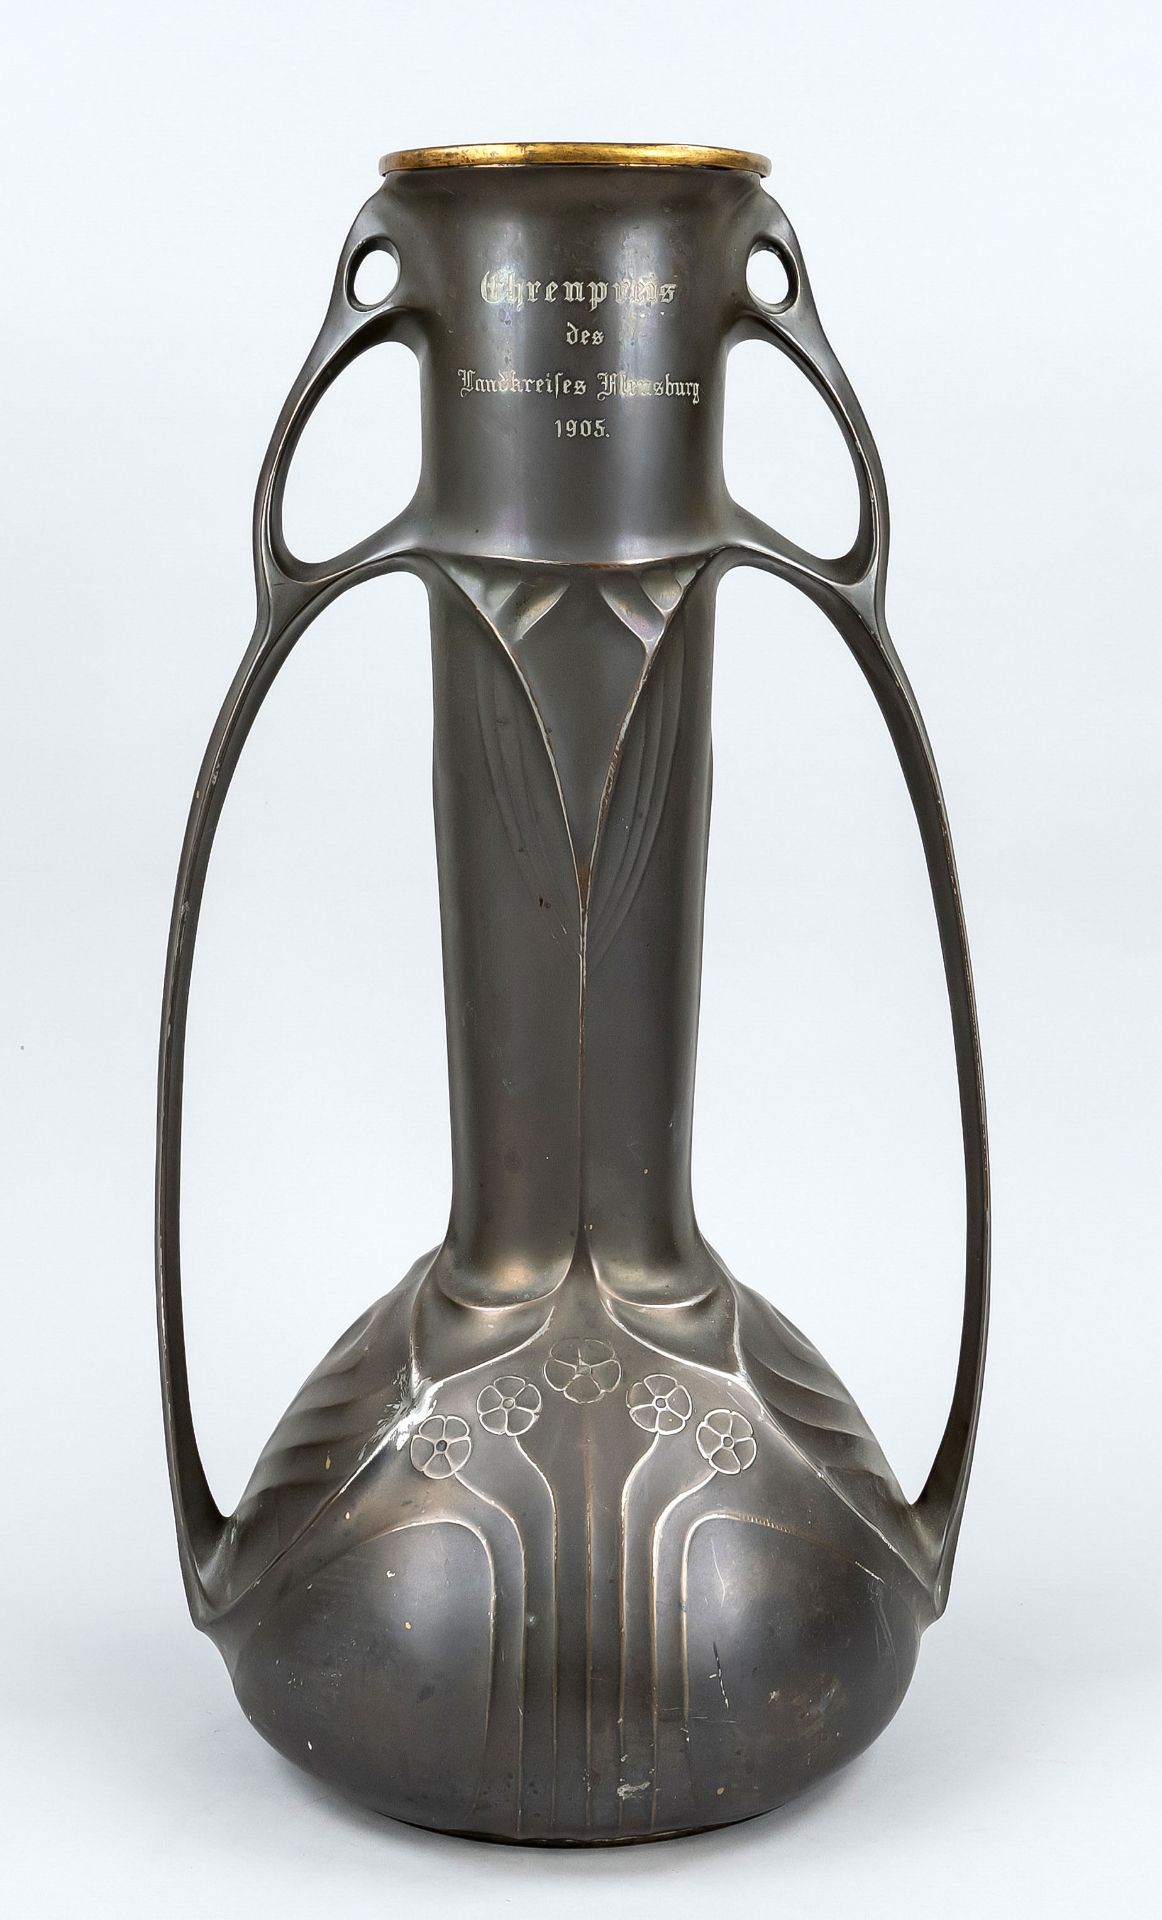 Large art nouveau vase, Germany, dated 1905, silver plated. Body decorated with vegetal relief